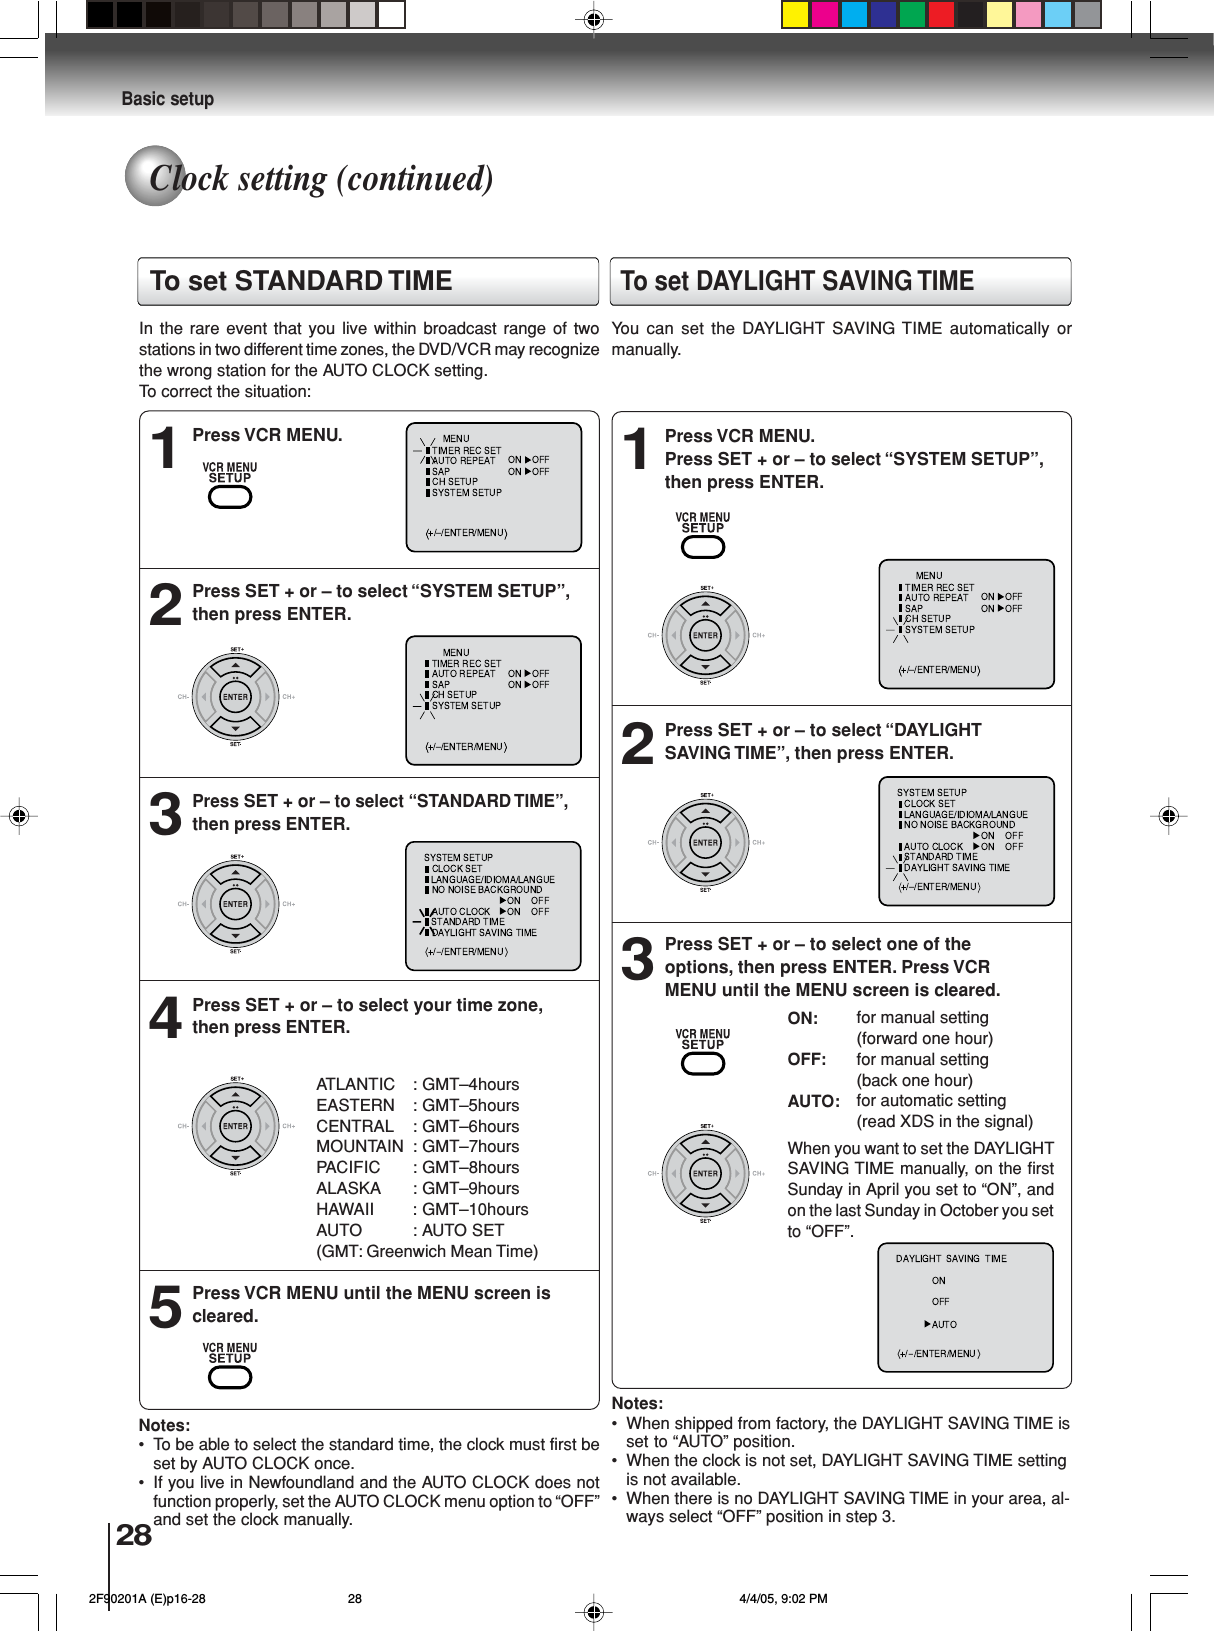 28Basic setupPress VCR MENU.1Press SET + or – to select “SYSTEM SETUP”,then press ENTER.2PressSET + or – to select “STANDARD TIME”,then press ENTER.3Press SET + or – to select your time zone,then press ENTER.4Press VCR MENU until the MENU screen iscleared.5In the rare event that you live within broadcast range of twostations in two different time zones, the DVD/VCR may recognizethe wrong station for the AUTO CLOCK setting.To correct the situation:Notes:• To be able to select the standard time, the clock must first beset by AUTO CLOCK once.• If you live in Newfoundland and the AUTO CLOCK does notfunction properly, set the AUTO CLOCK menu option to “OFF”and set the clock manually.Press VCR MENU.Press SET + or – to select “SYSTEM SETUP”,then press ENTER.1Press SET + or – to select “DAYLIGHTSAVING TIME”, then press ENTER.2Press SET + or – to select one of theoptions, then press ENTER. Press VCRMENU until the MENU screen is cleared.3Notes:• When shipped from factory, the DAYLIGHT SAVING TIME isset to “AUTO” position.• When the clock is not set, DAYLIGHT SAVING TIME settingis not available.• When there is no DAYLIGHT SAVING TIME in your area, al-ways select “OFF” position in step 3.When you want to set the DAYLIGHTSAVING TIMEmanually, on the firstSunday in April you set to “ON”, andon the last Sunday in October you setto “OFF”.ON:OFF:AUTO:for manual setting(forward one hour)for manual setting(back one hour)for automatic setting(read XDS in the signal)⟨⟩ATLANTIC : GMT–4hoursEASTERN : GMT–5hoursCENTRAL : GMT–6hoursMOUNTAIN : GMT–7hoursPACIFIC : GMT–8hoursALASKA : GMT–9hoursHAWAII : GMT–10hoursAUTO : AUTO SET(GMT: Greenwich Mean Time)⟨ ⟩To set DAYLIGHT SAVING TIMEYou can set the DAYLIGHT SAVING TIME automatically ormanually.To set STANDARD TIMEClock setting (continued) 2F90201A (E)p16-28 4/4/05, 9:02 PM28